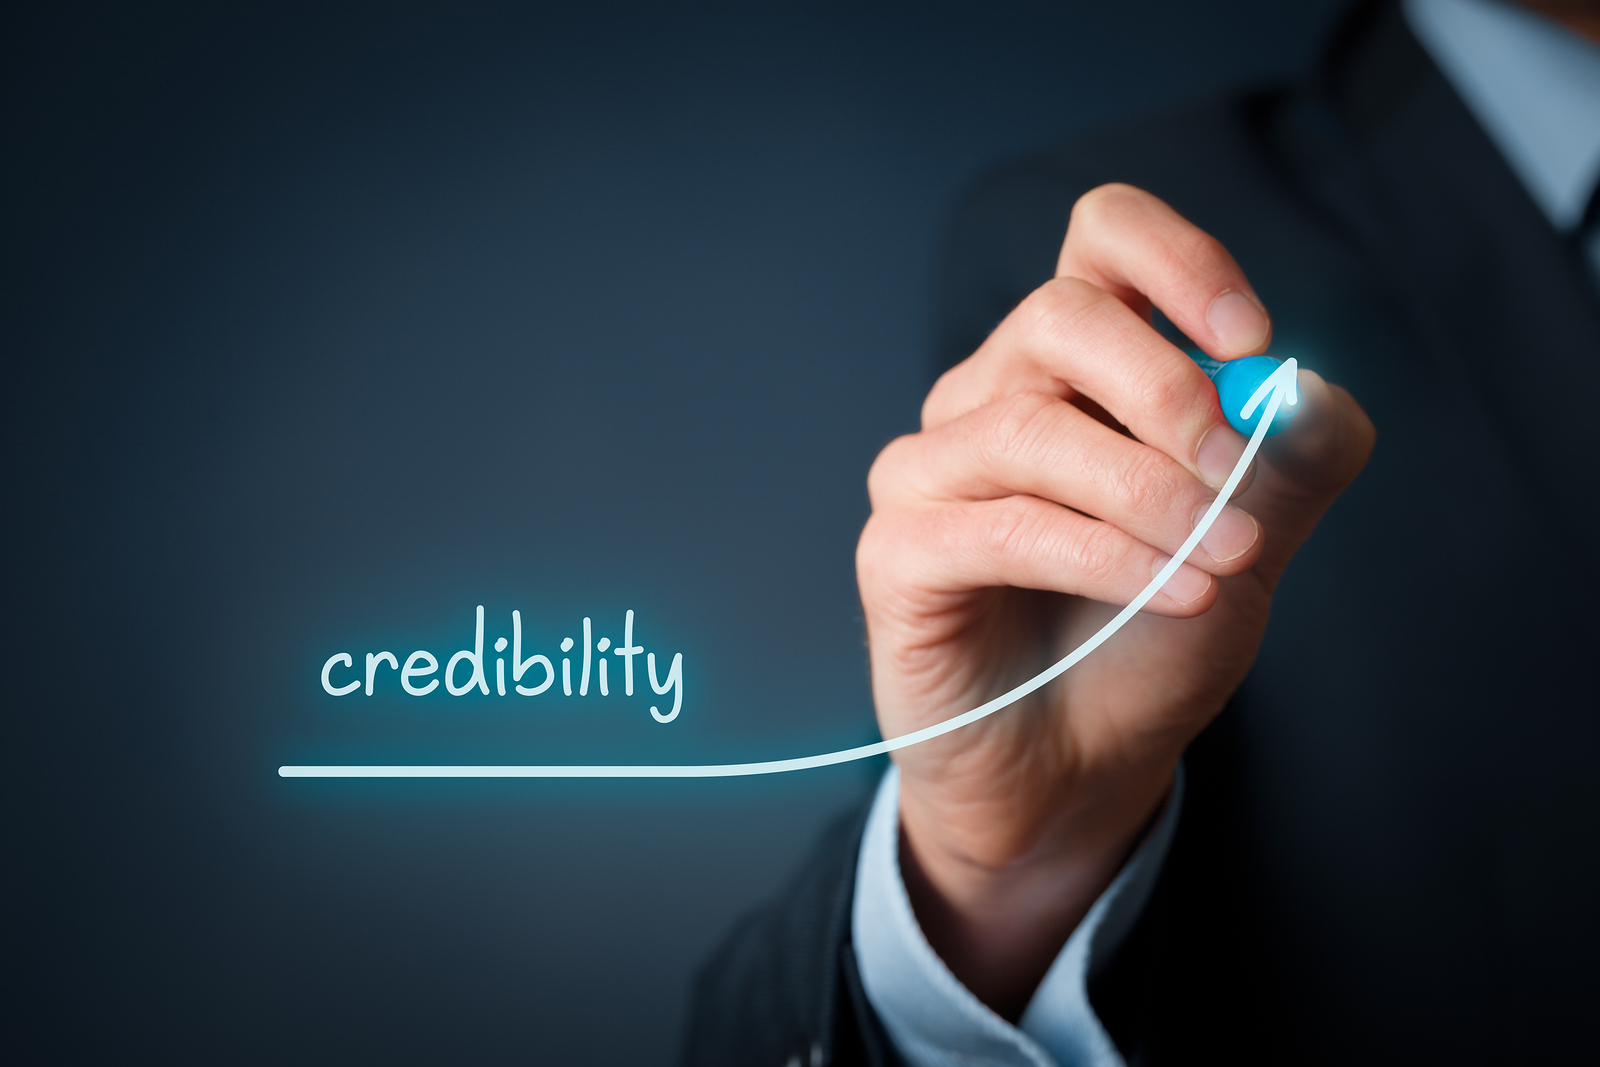 Credibility in business